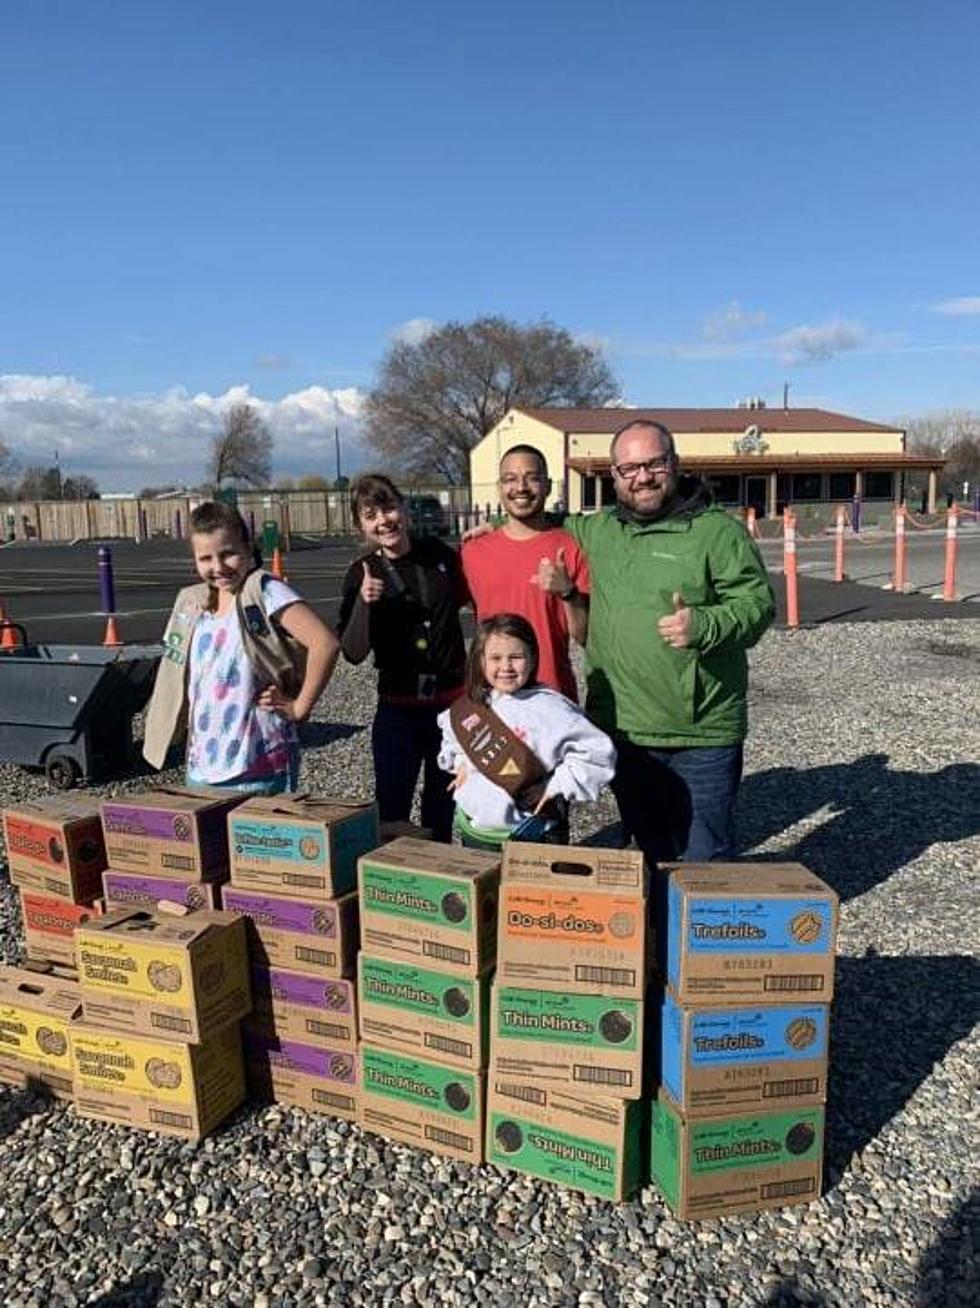 Green 2 Go Owner Buys Entire Girl Scout Cookie Stash!